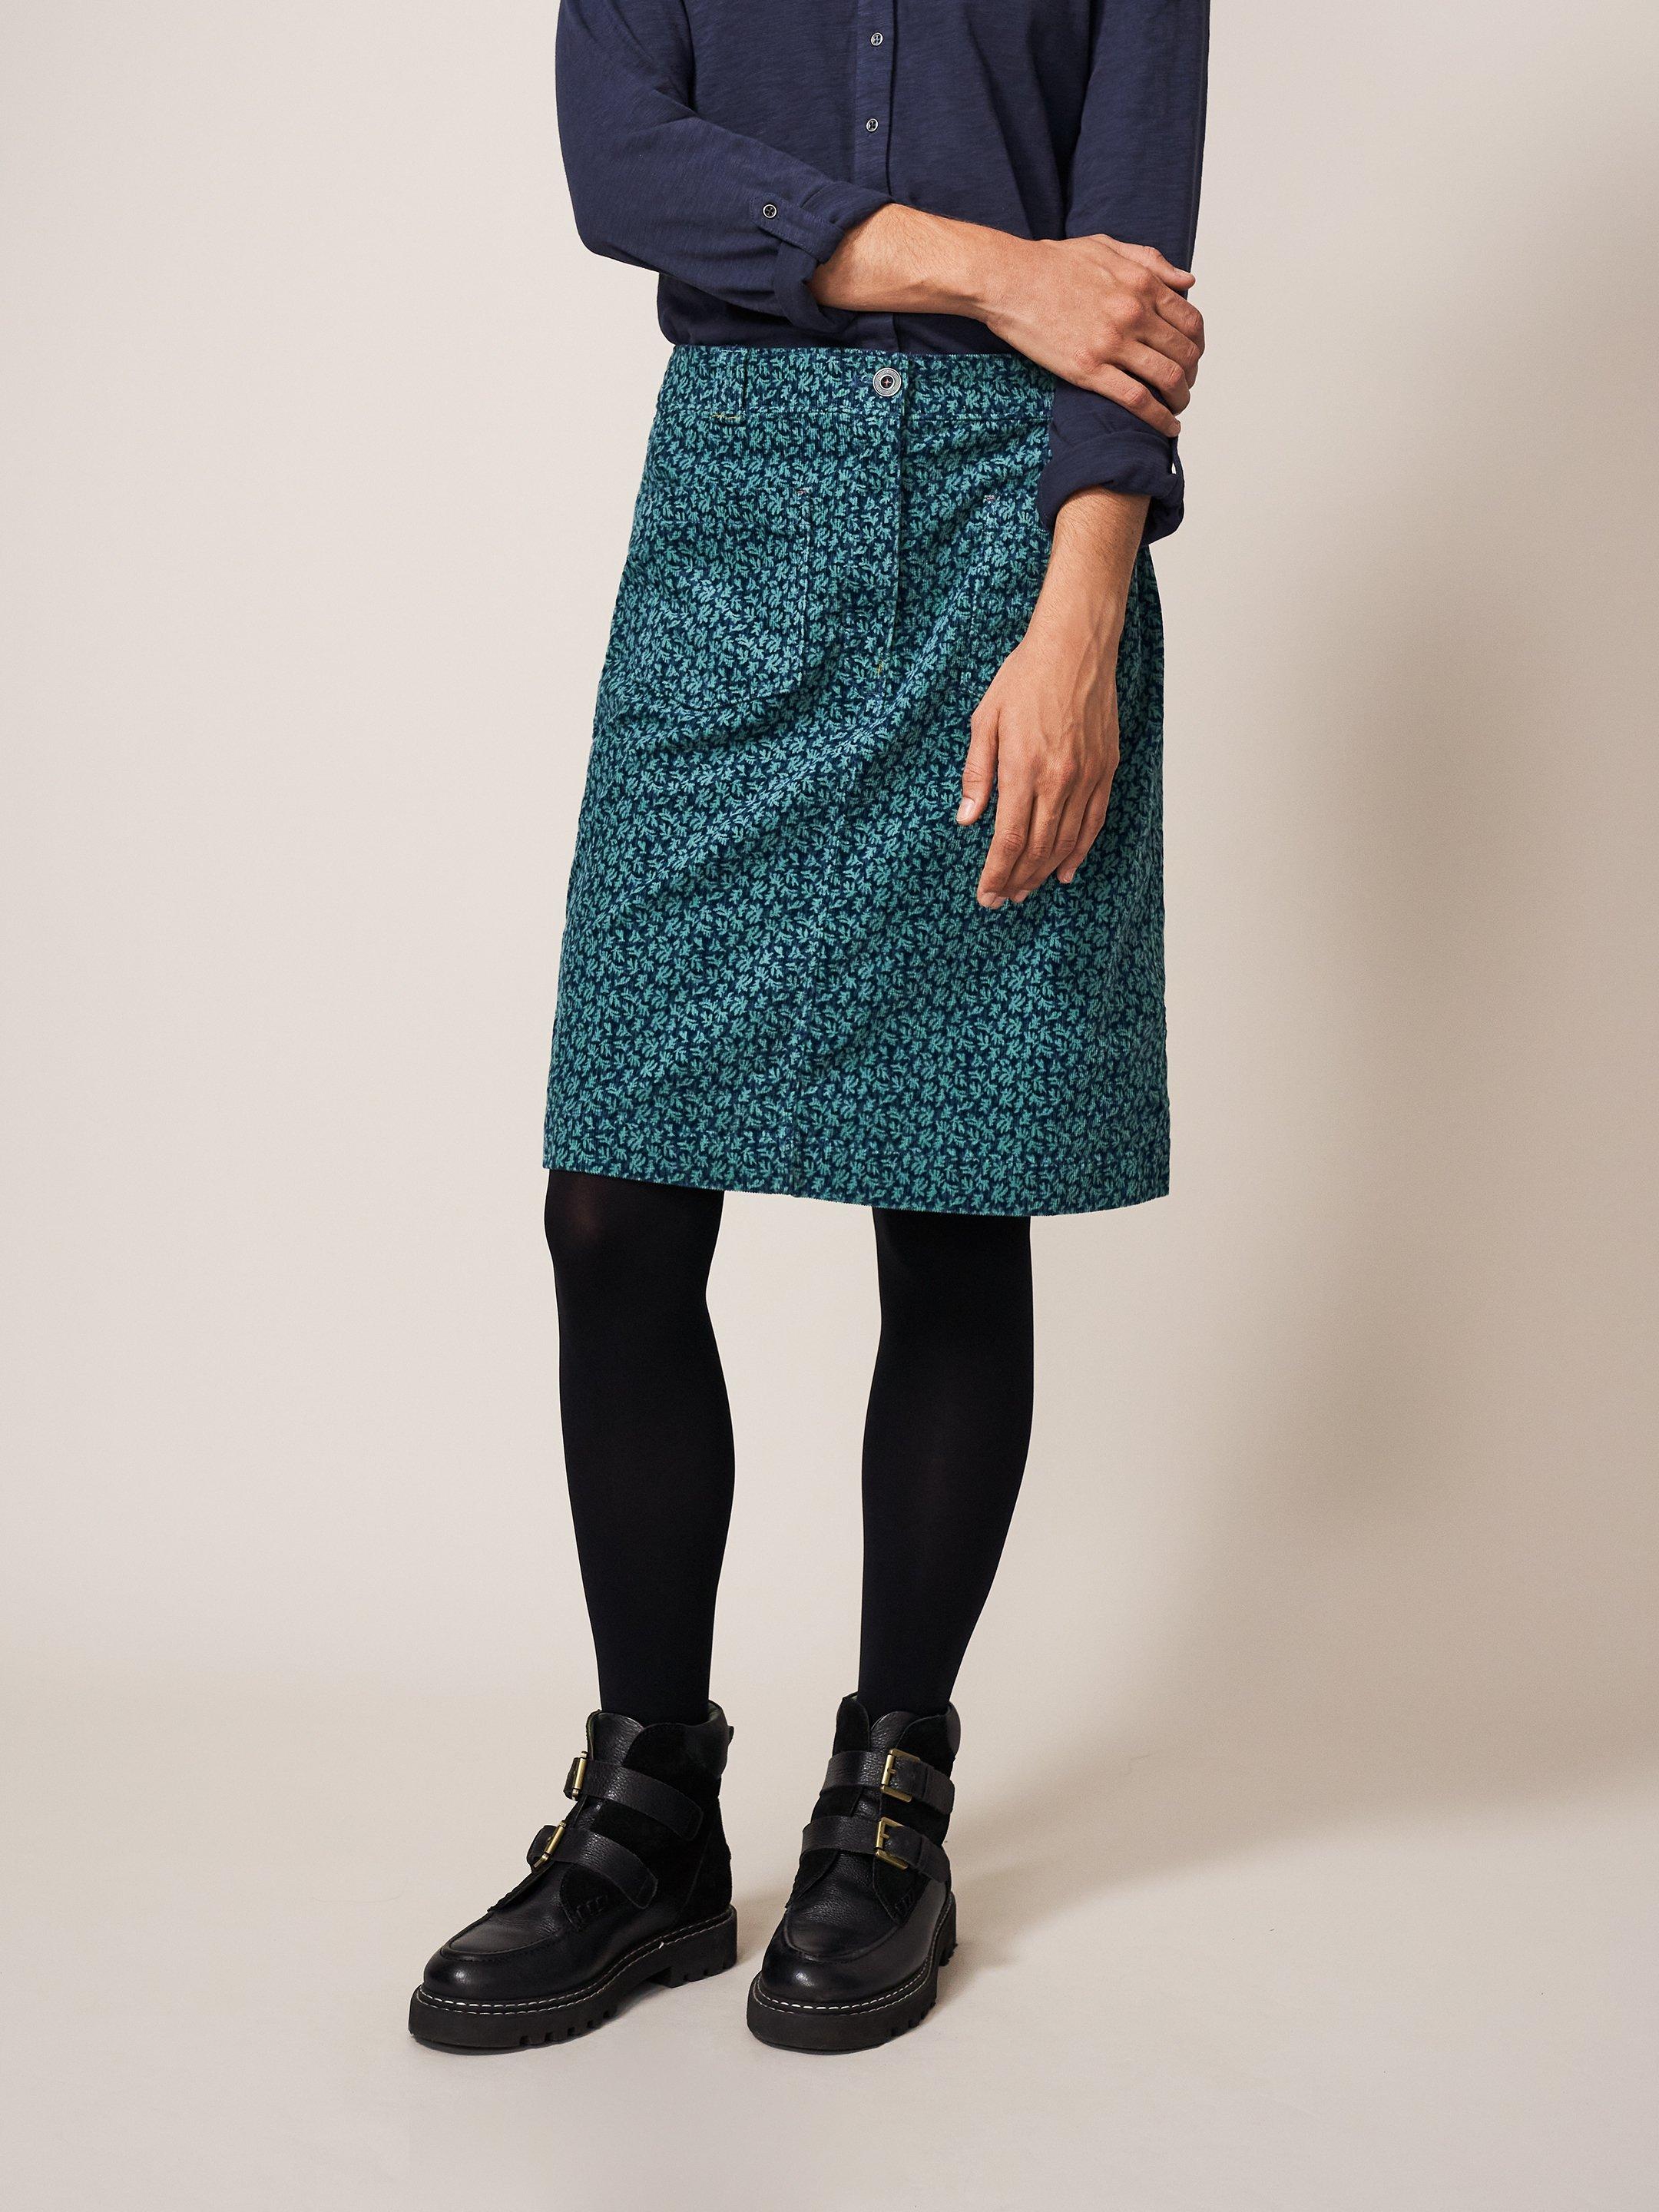 Melody Organic Cord Skirt in TEAL MLT - MODEL FRONT